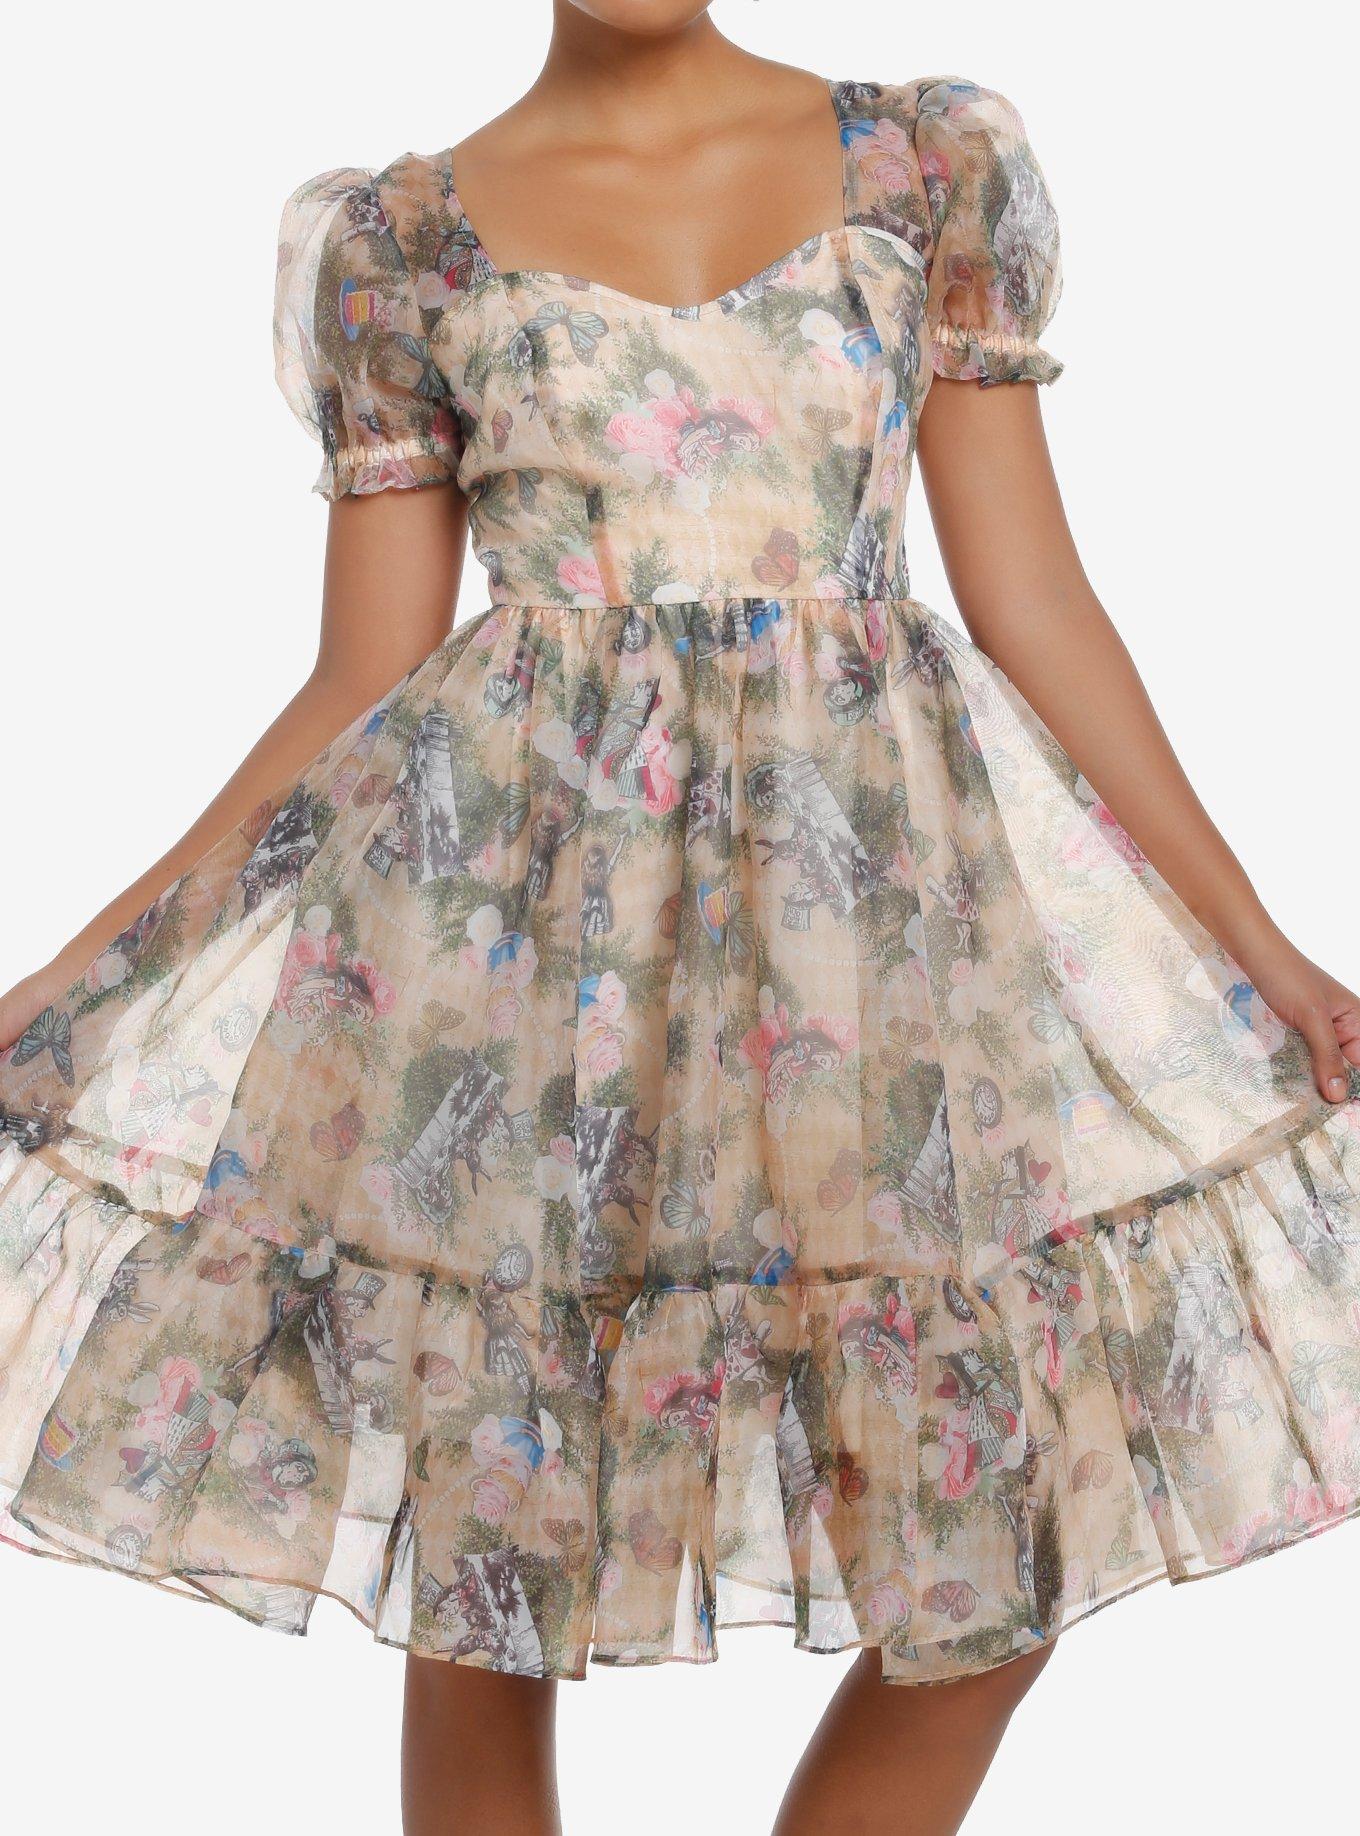 Thorn & Fable Through The Looking Glass Tea Party Organza Maxi Dress, PINK, hi-res